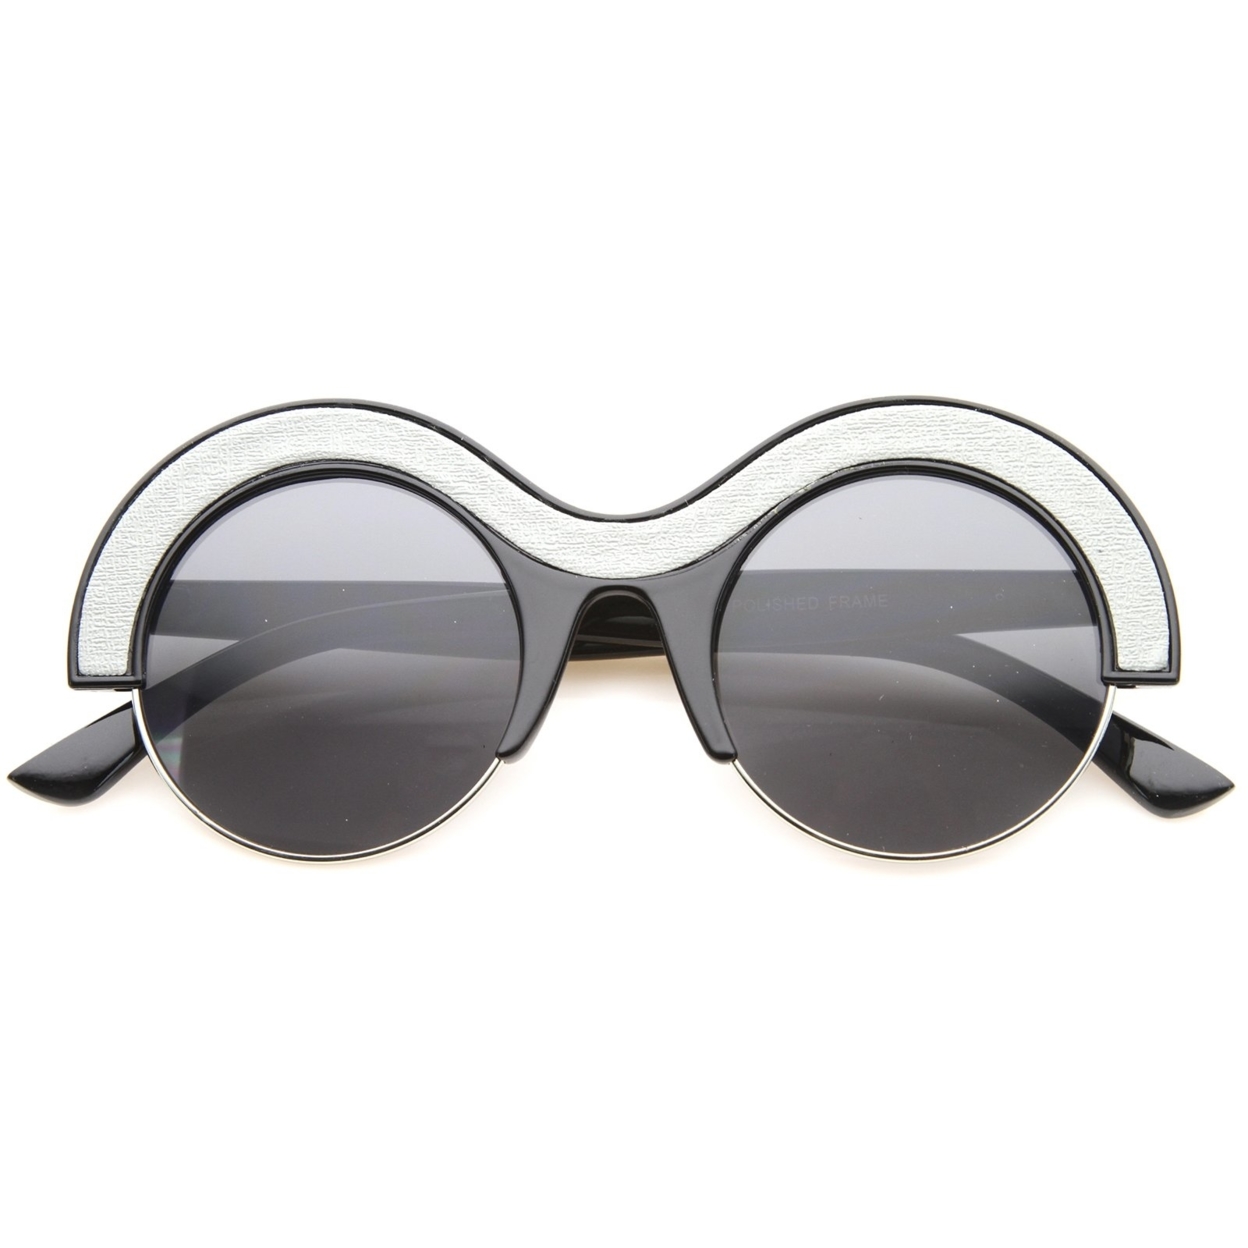 Womens Round Sunglasses With UV400 Protected Mirrored Lens - Black-Grey / Ice